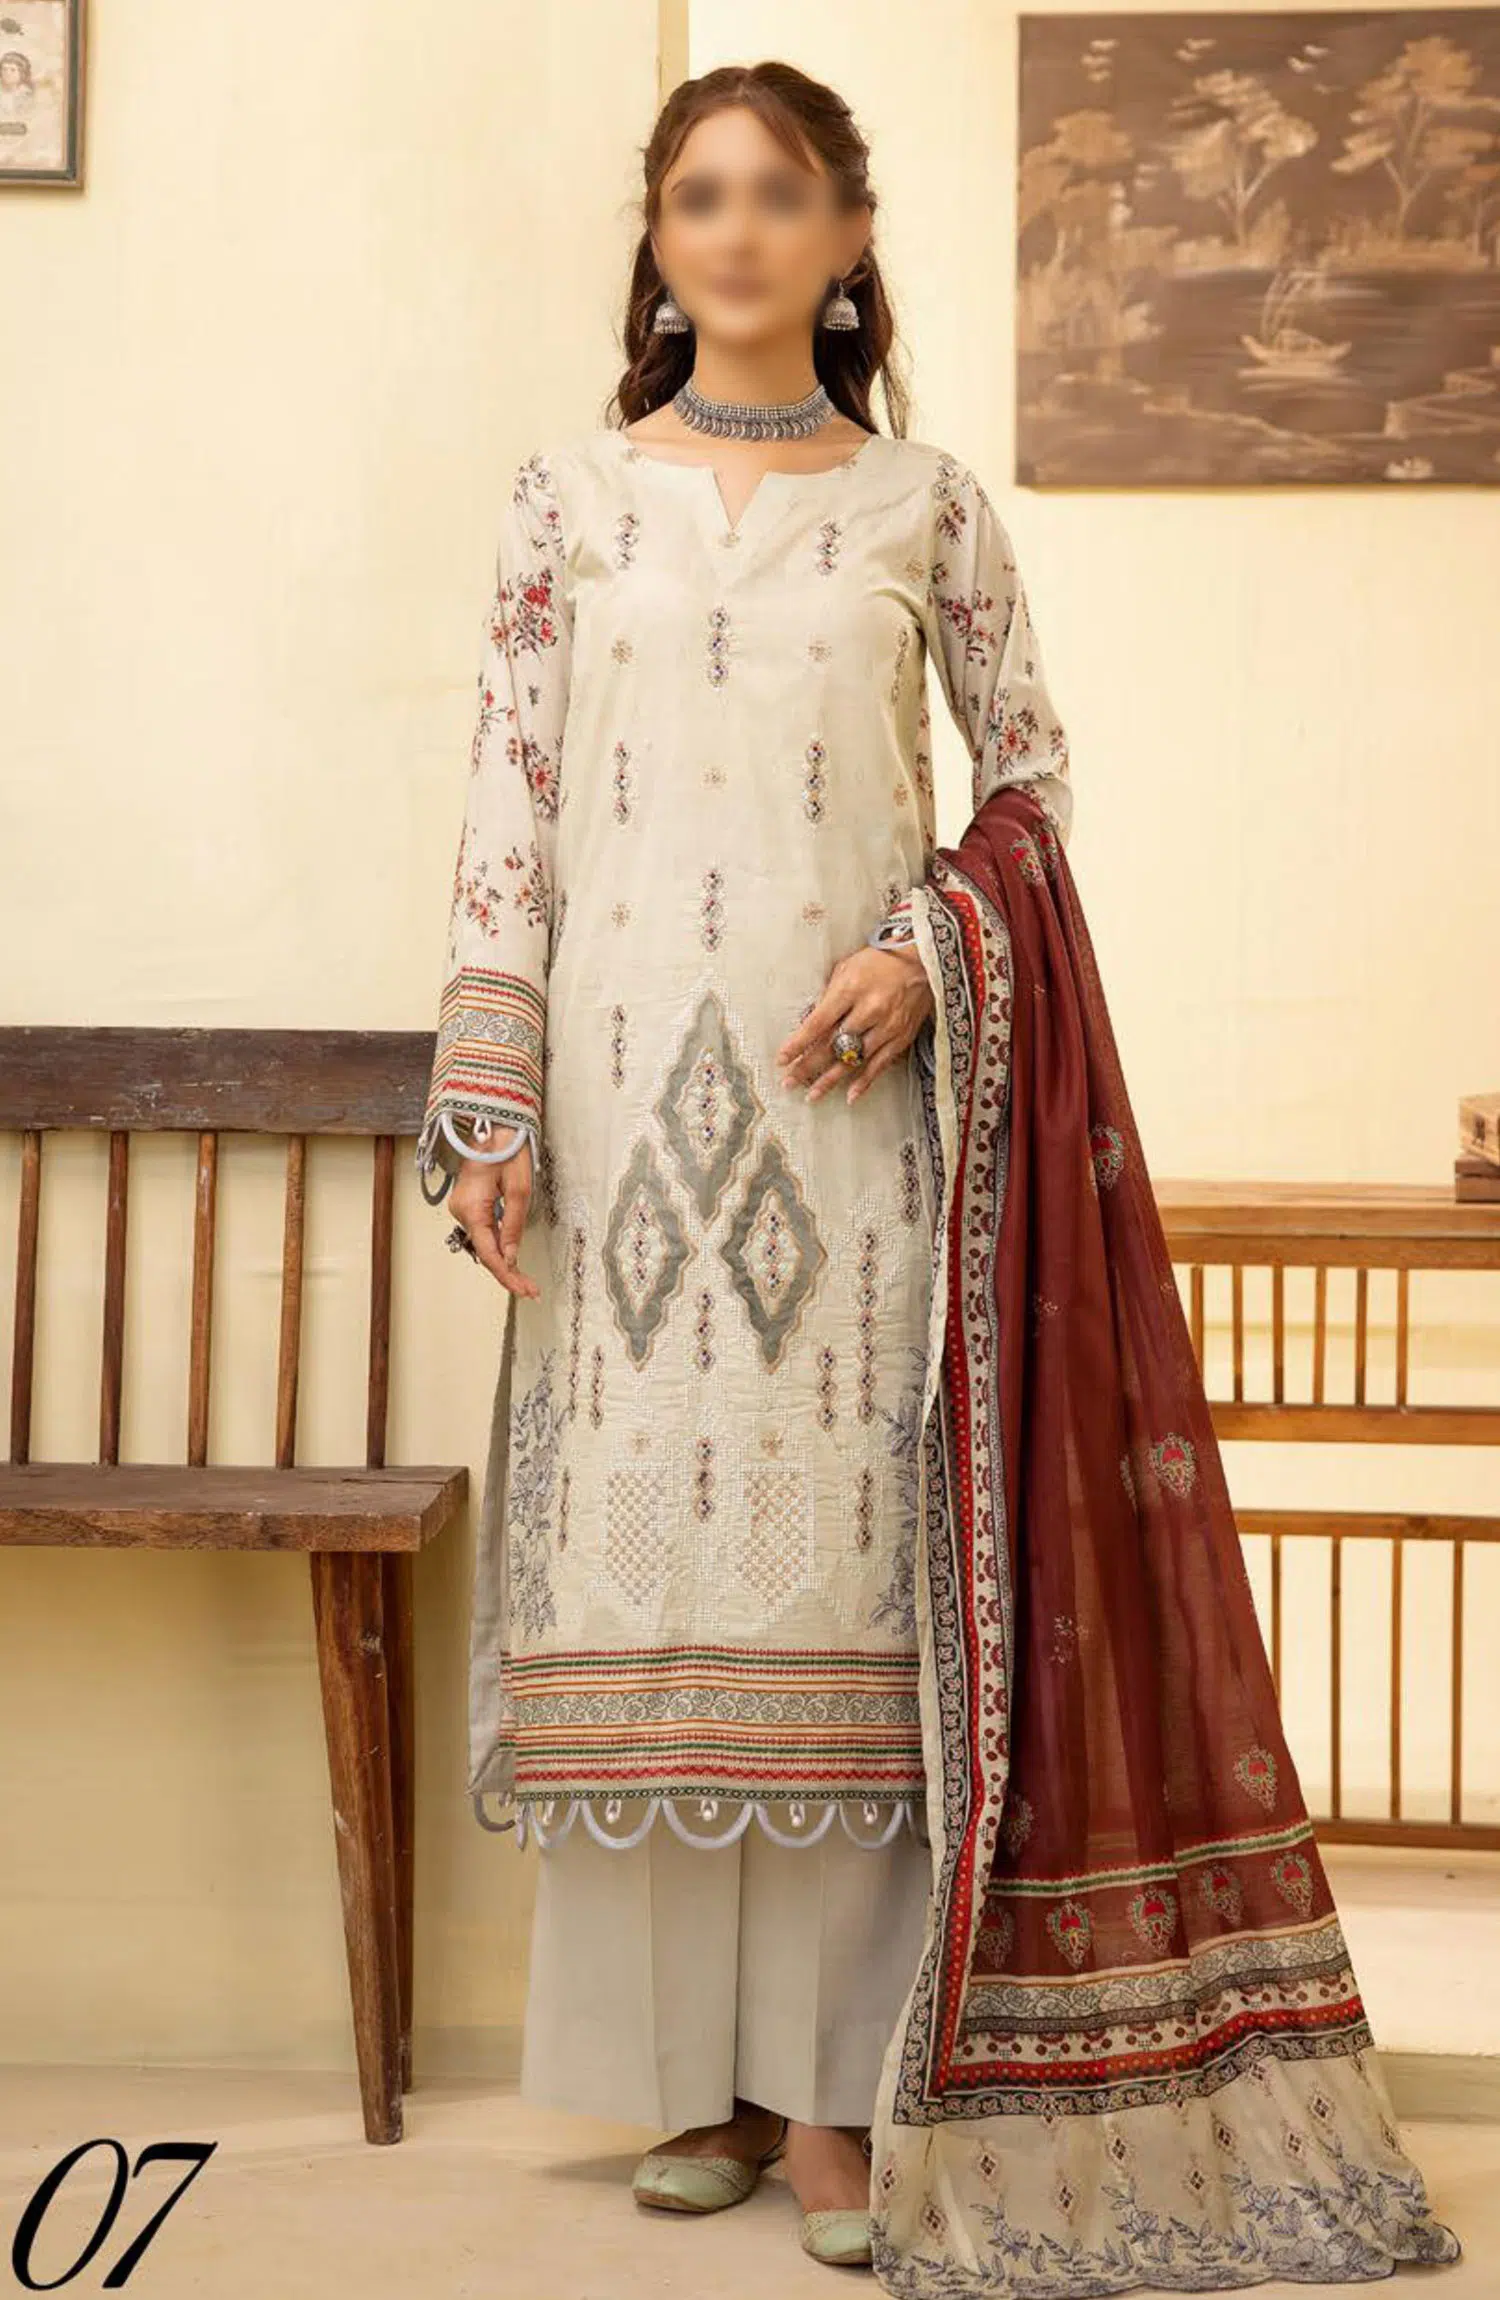 Mahees Ghazal Embroidered Lawn with Emb Voile Dupatta Collection - Design 07